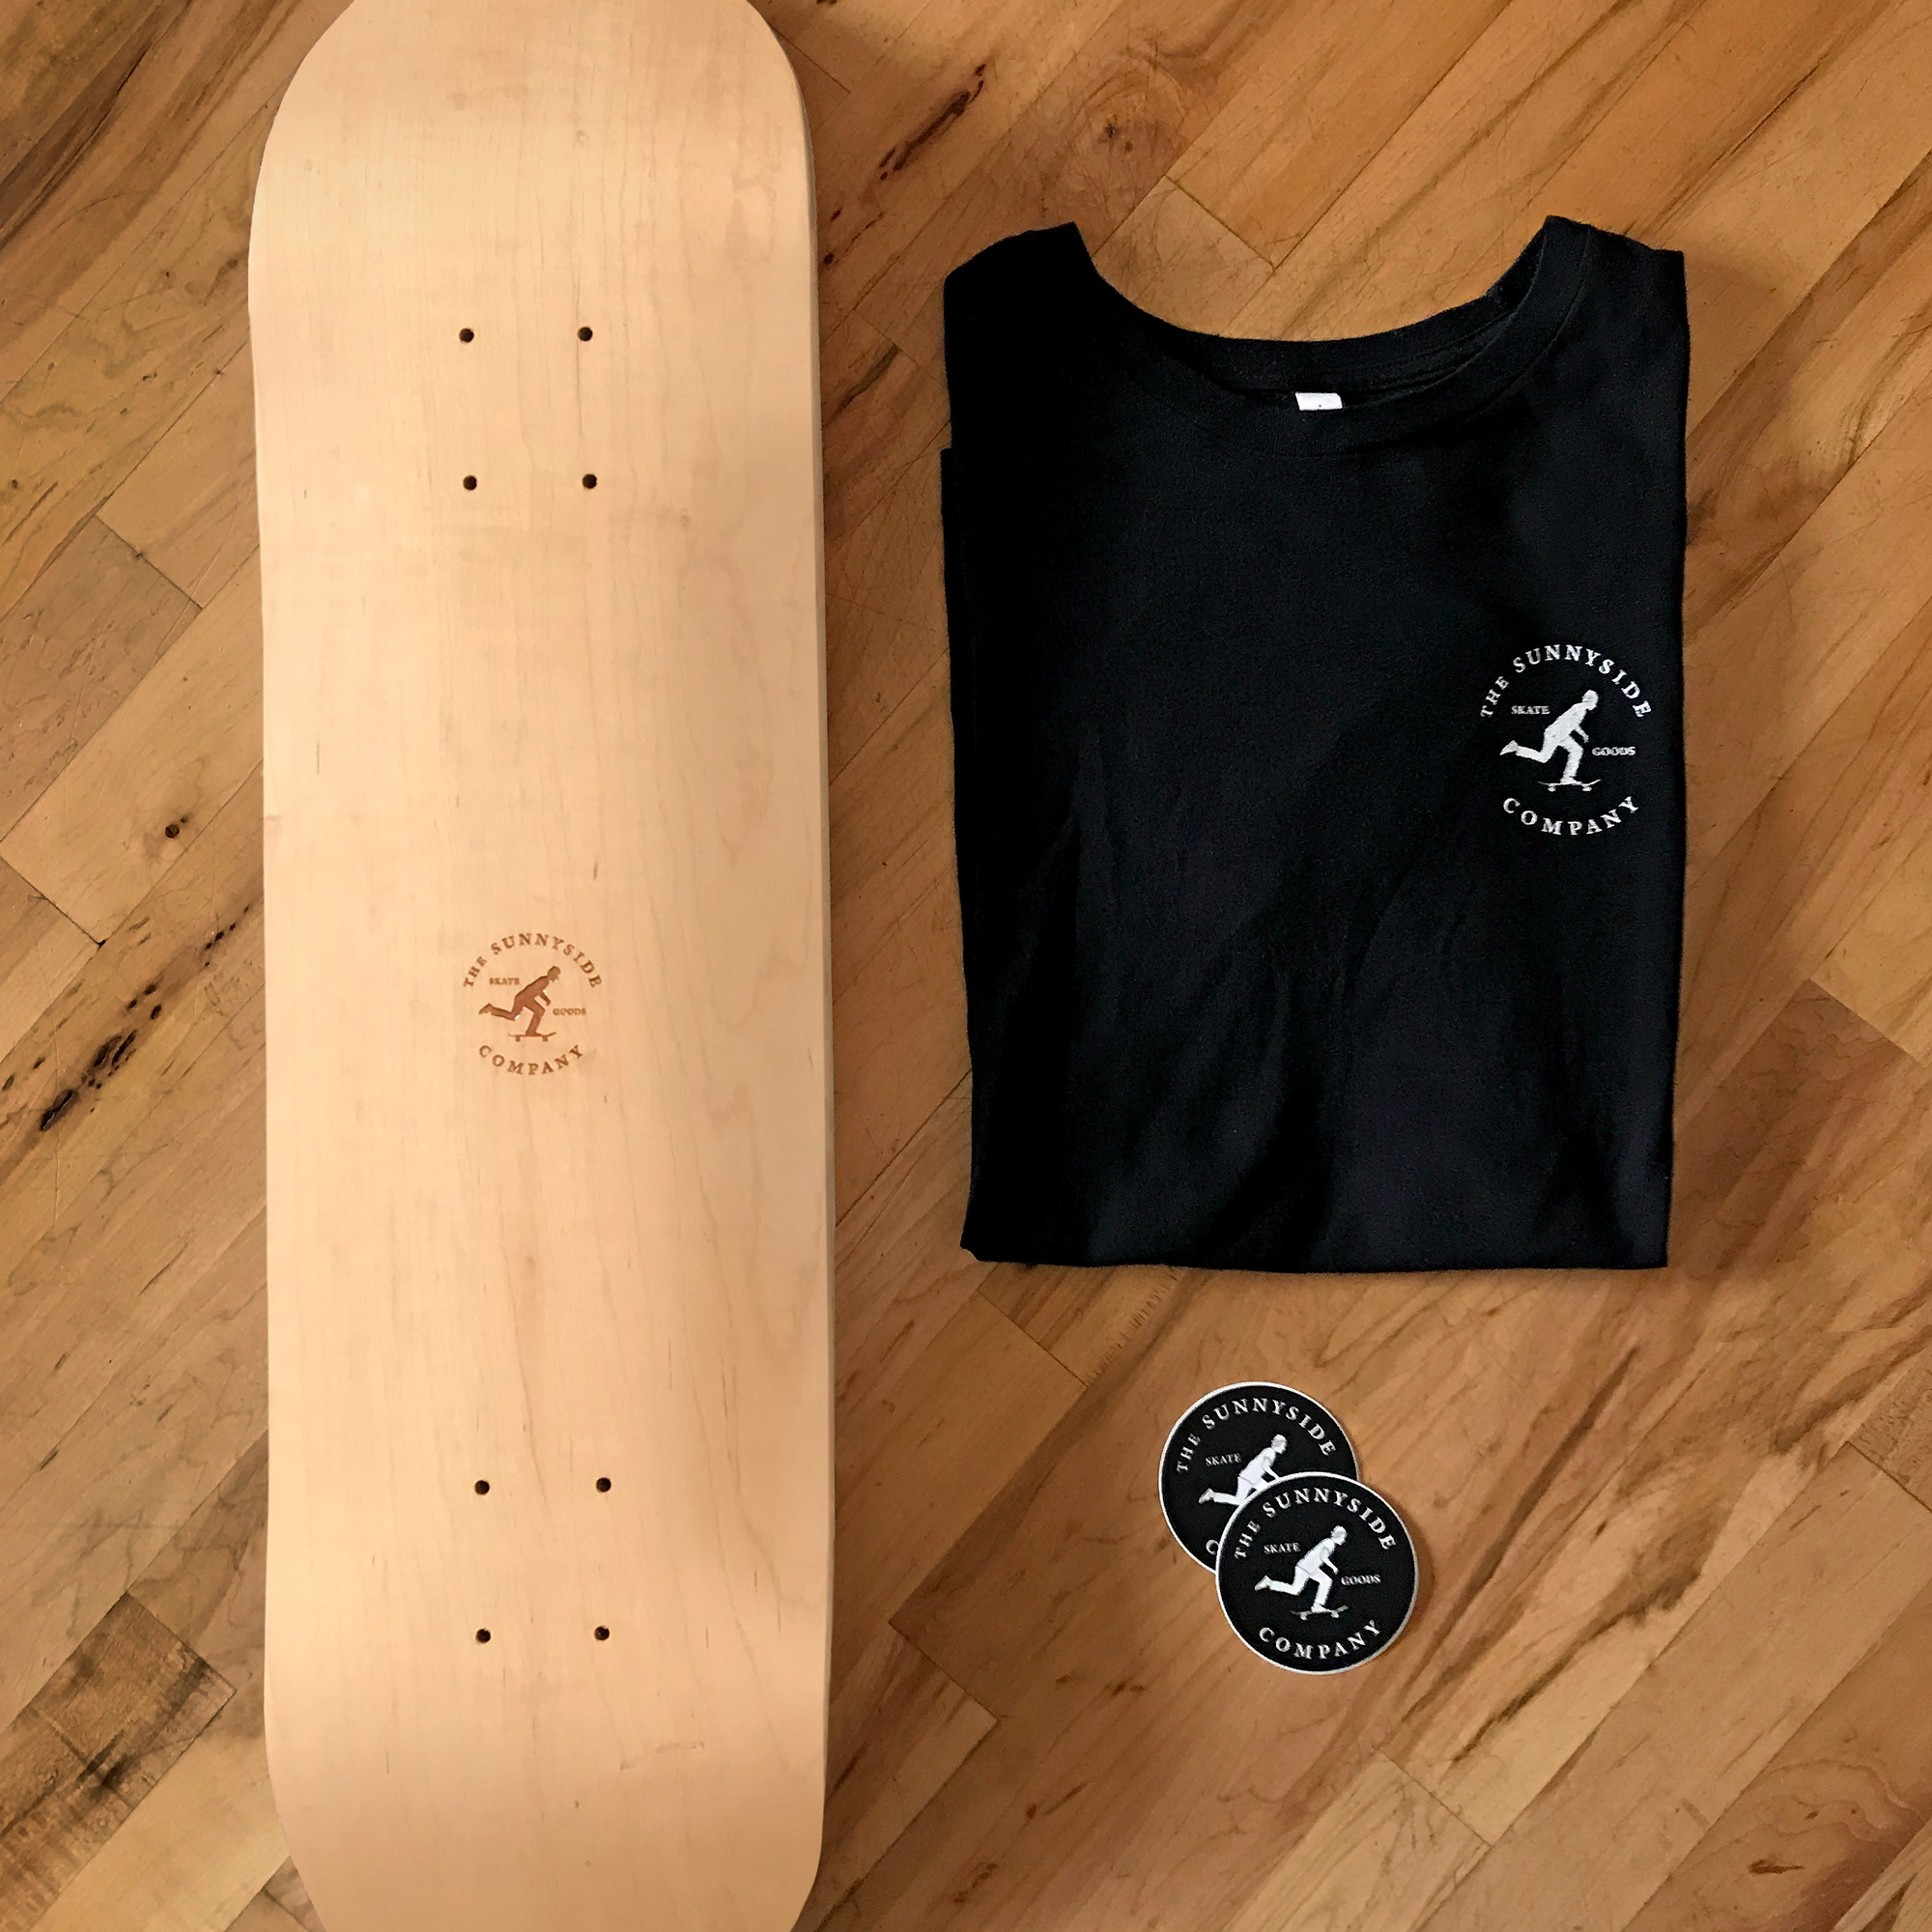 Skateboard deck, t-shirt, and stickers featuring logo of skateboarder pushing